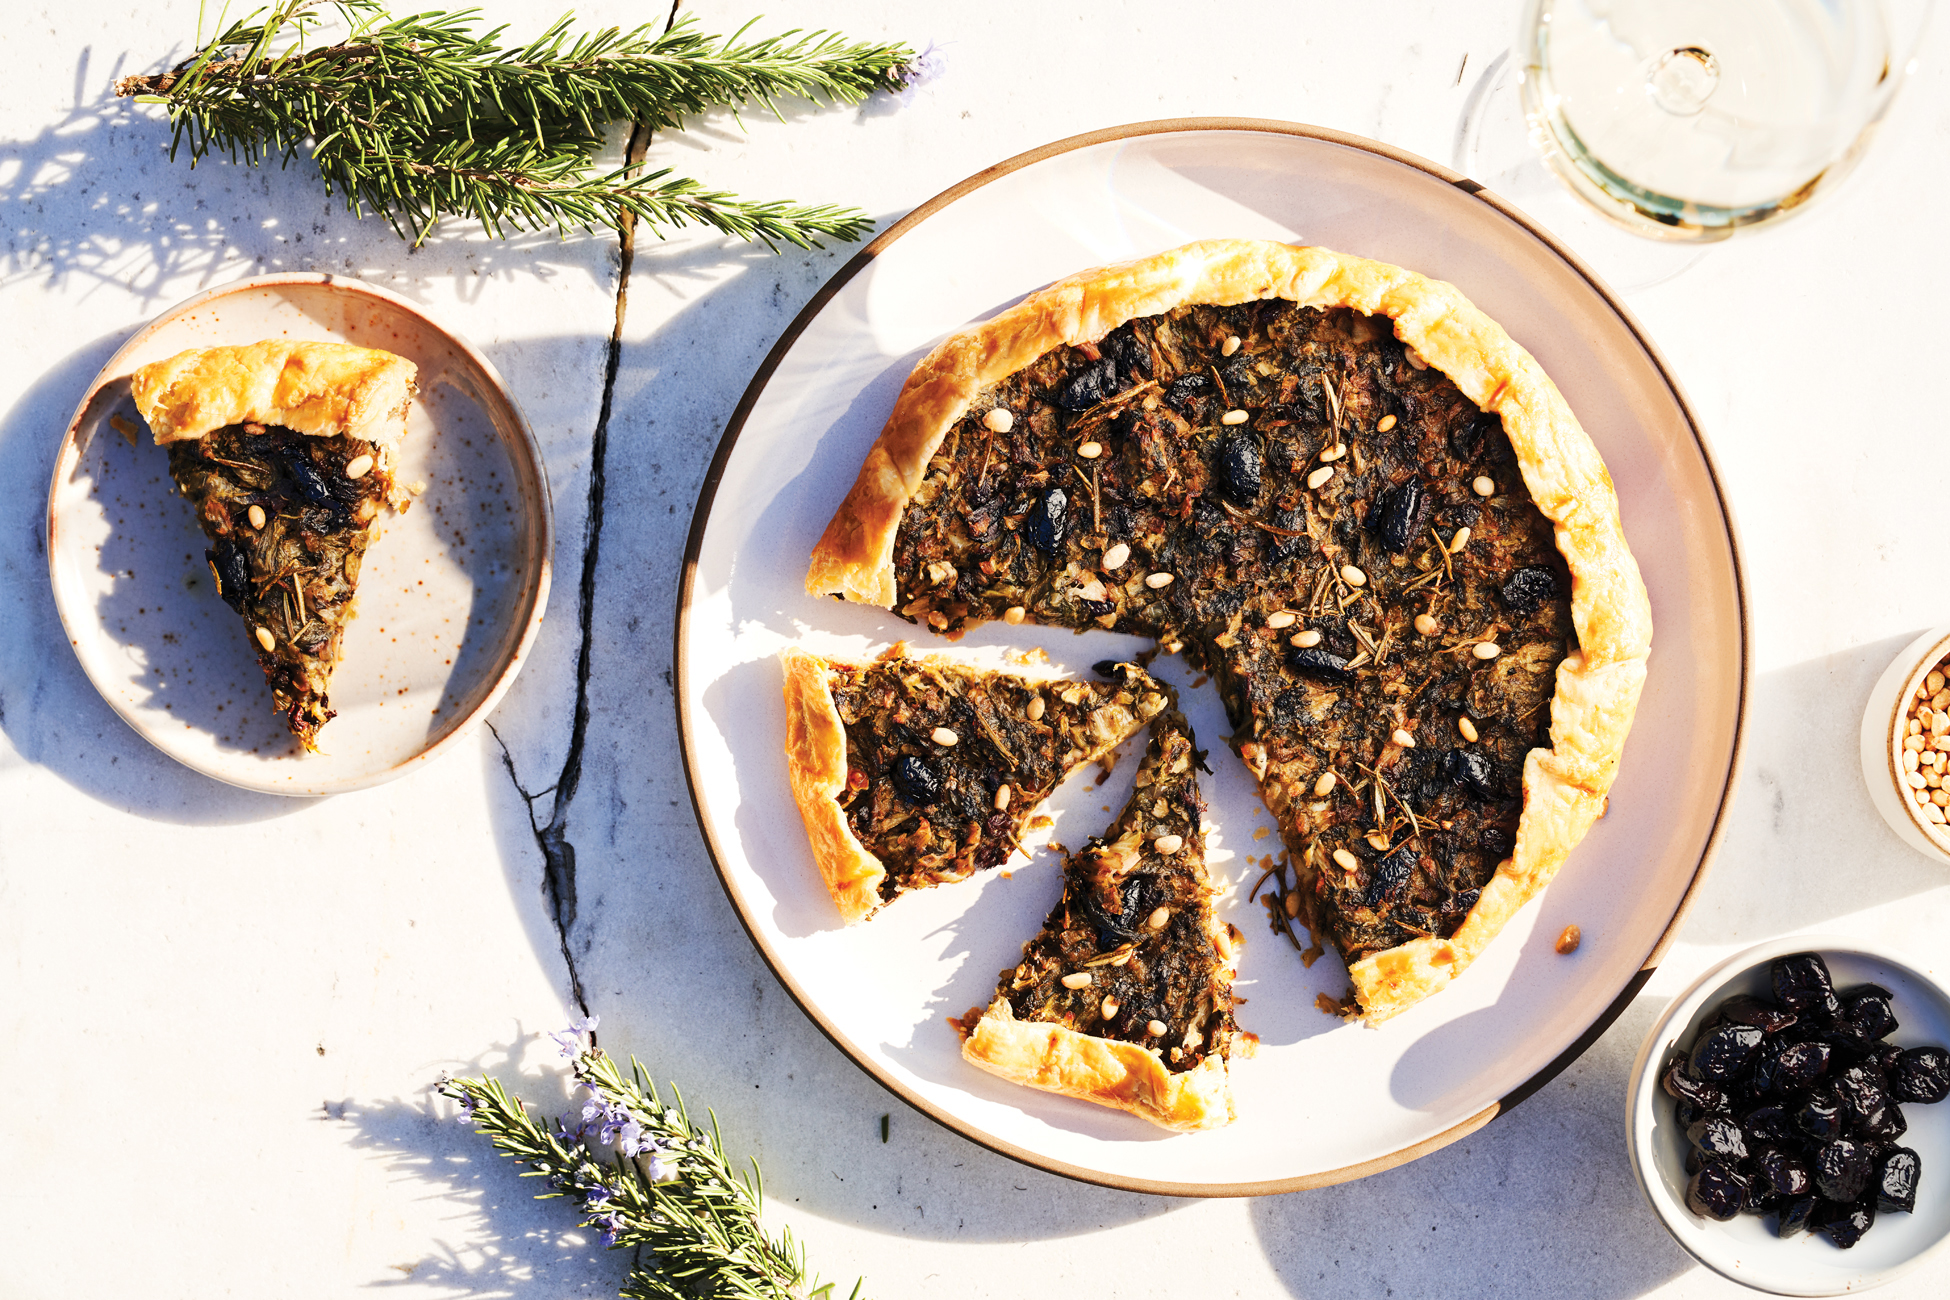 Escarole Galette with Black Olives and Pine Nuts